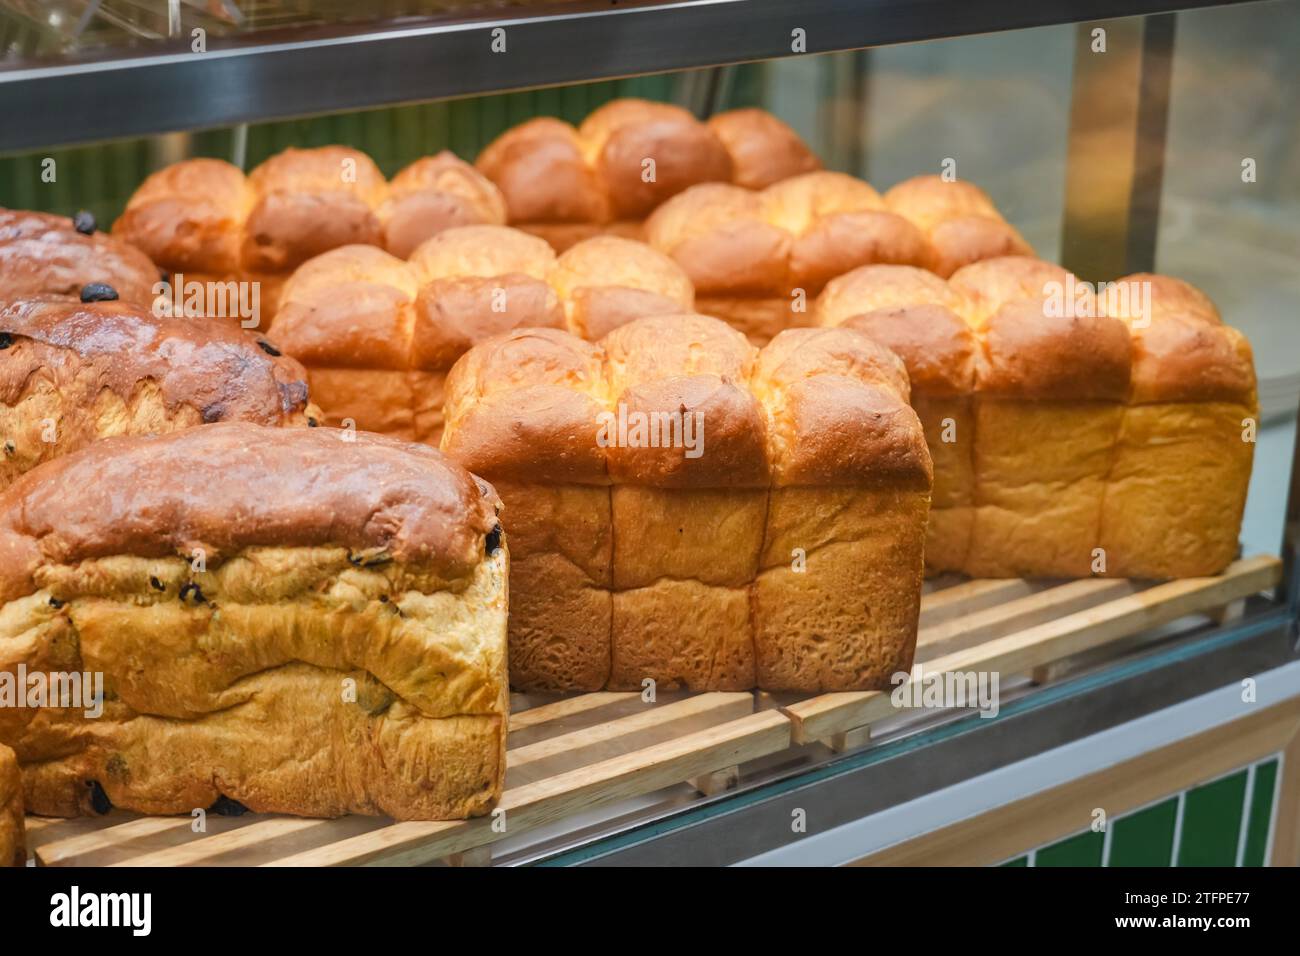 Soft fluffy white bread loaf, Japanese milk bread on display in a store. Stock Photo